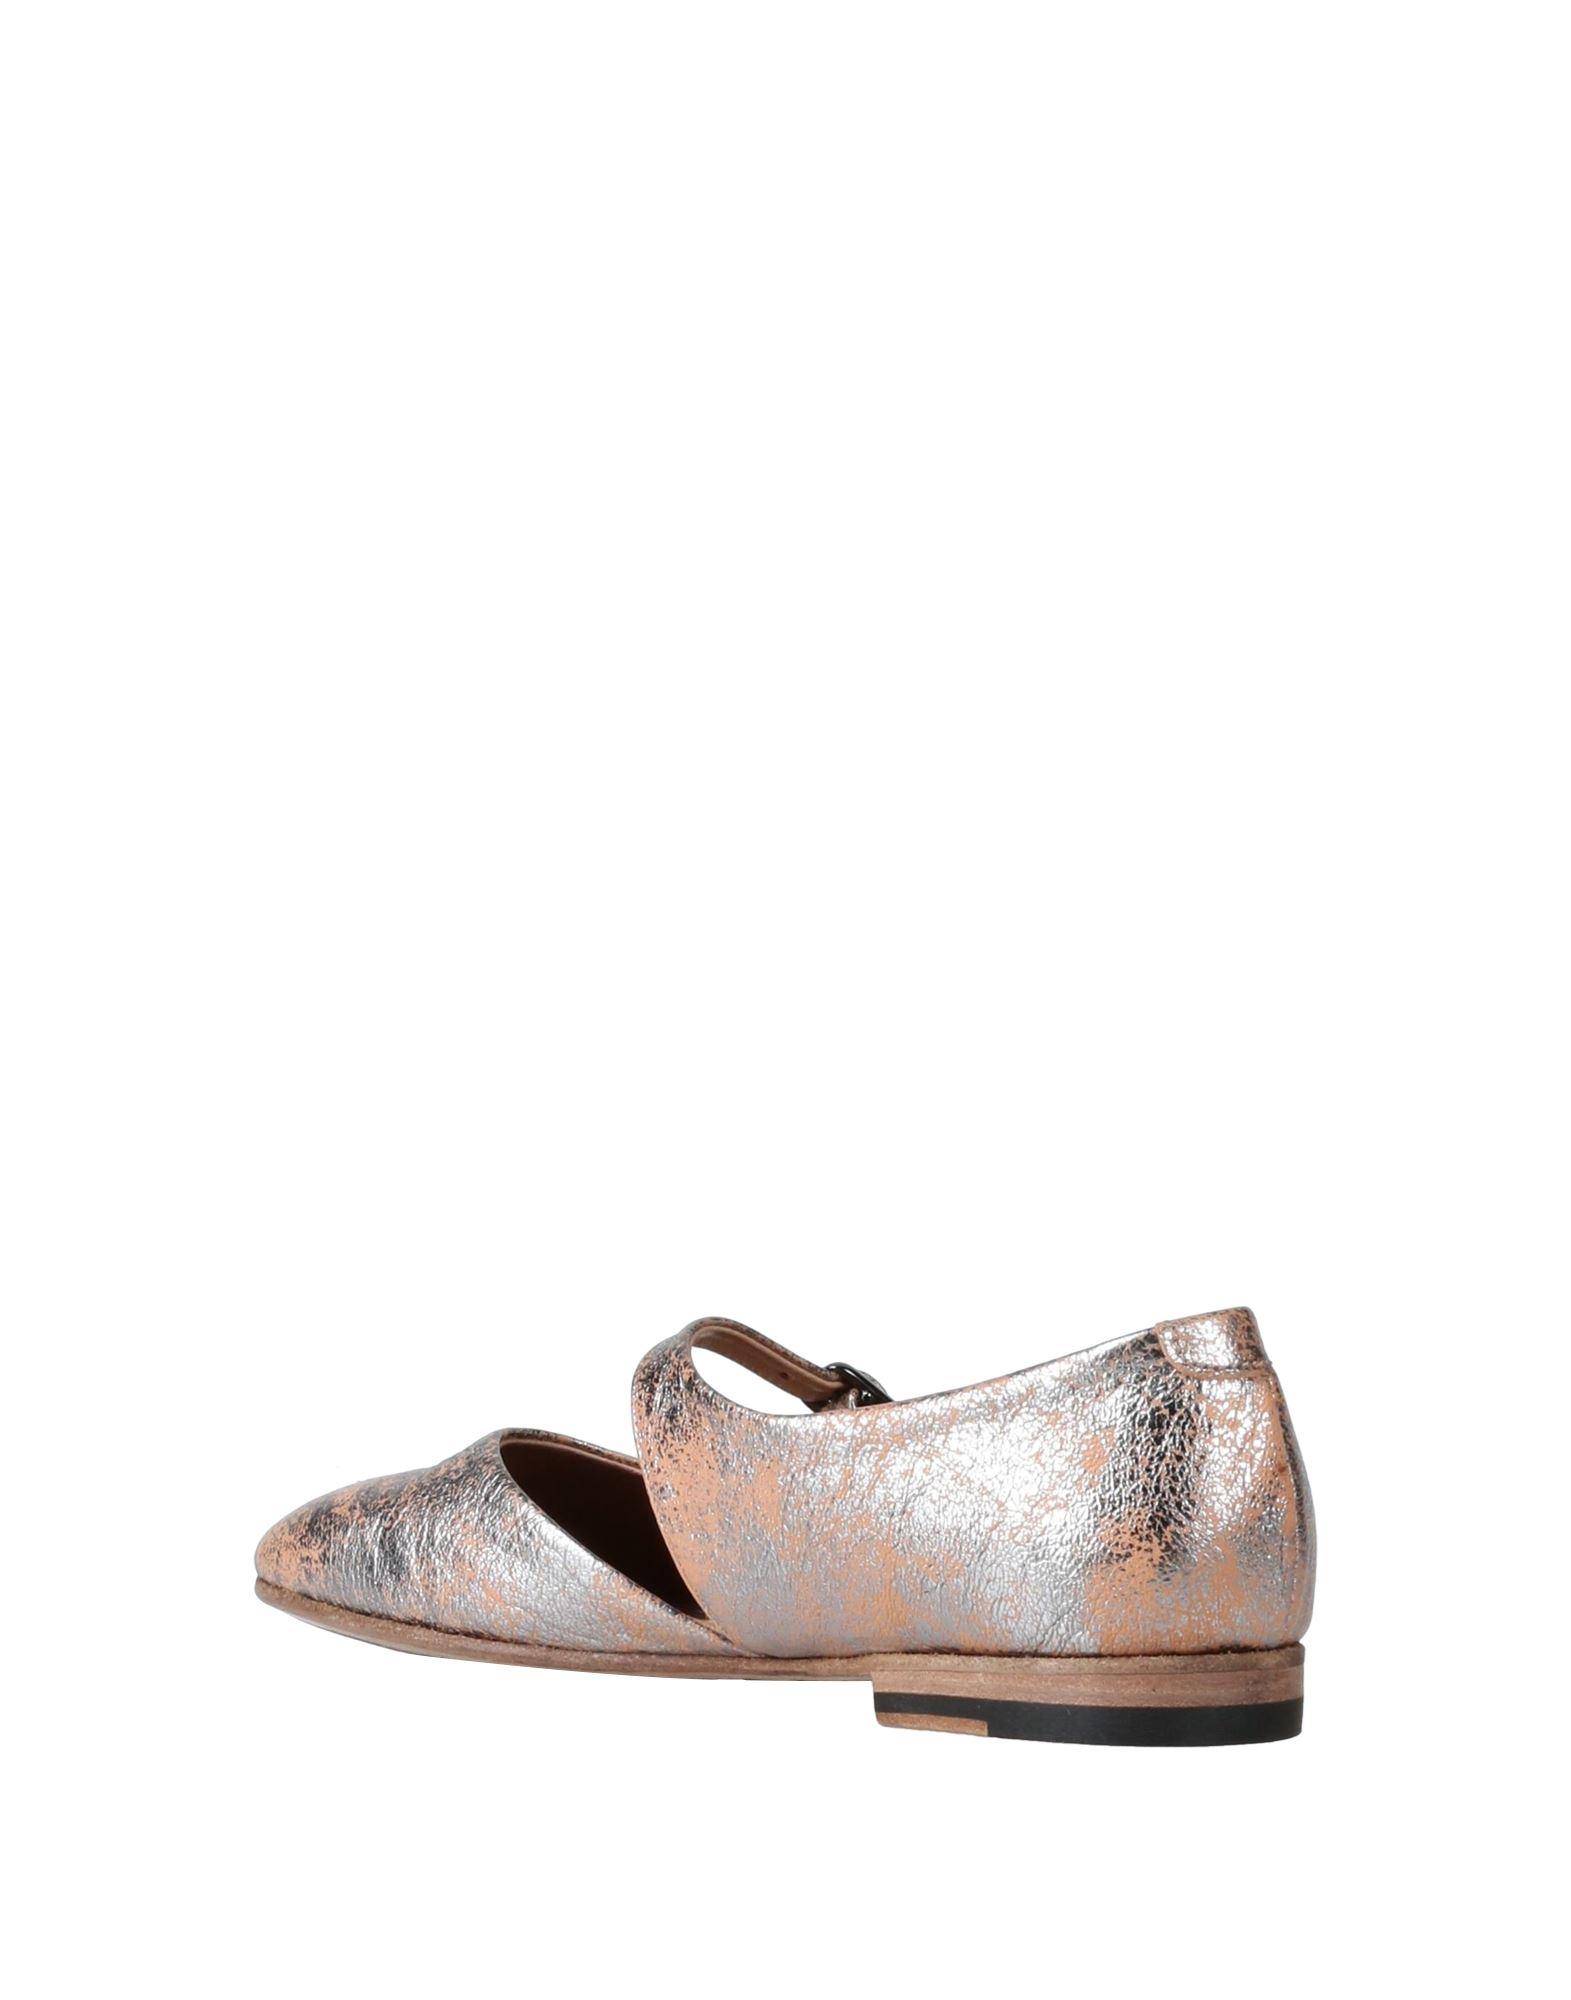 Pantanetti Leather Ballet Flats in Beige (Natural) | Lyst